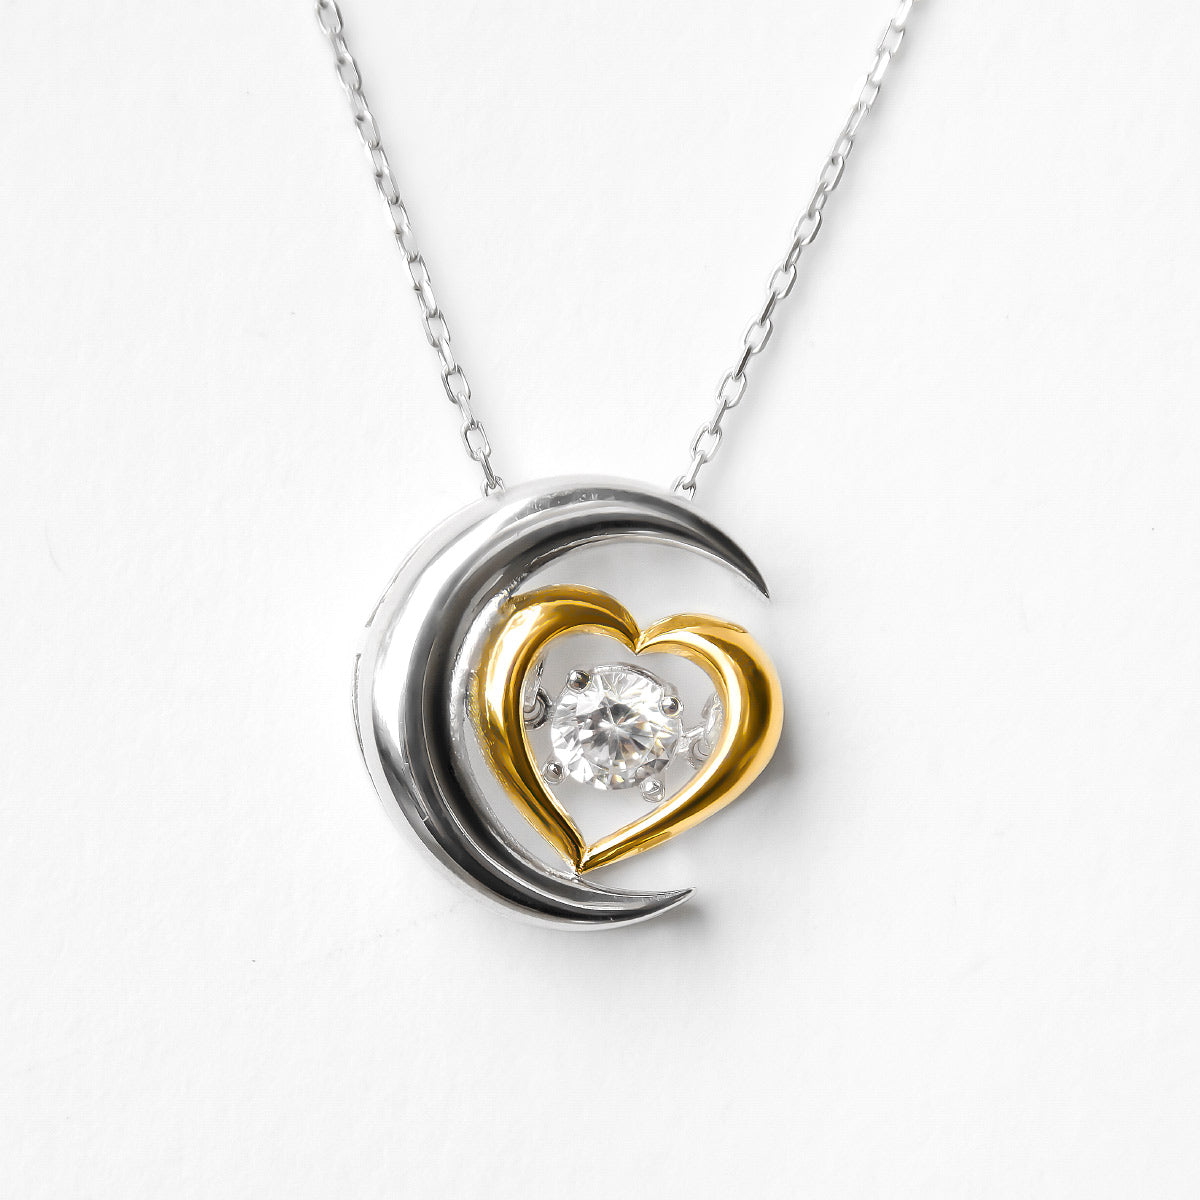 Shoot for the Moon - Dancing Crystal Moon Heart Necklace Gift Set